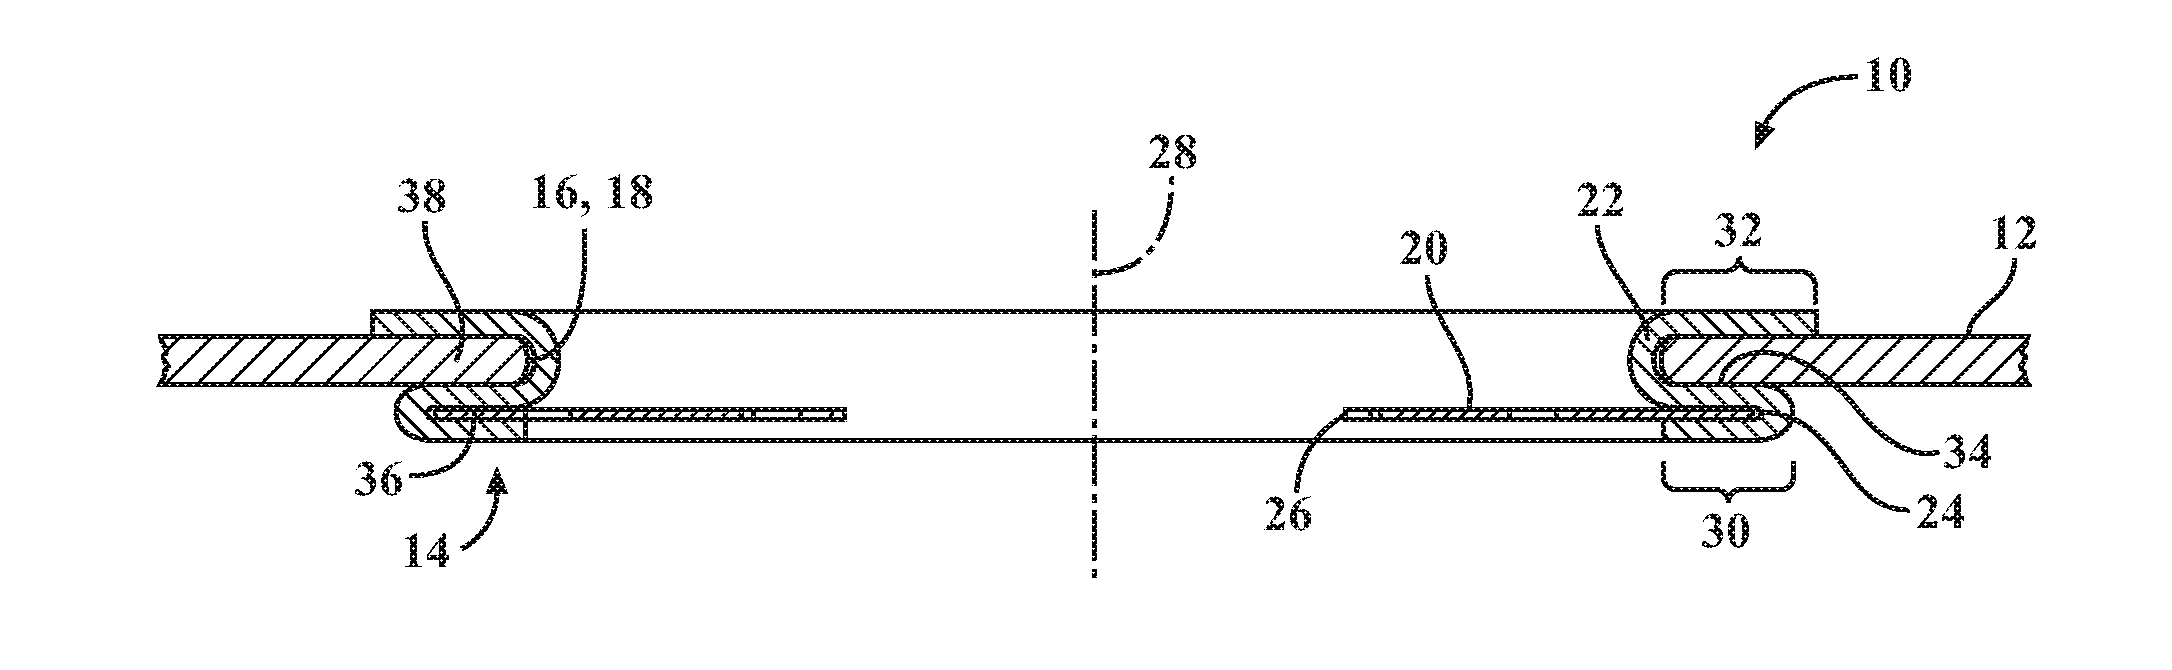 Heat and vibration mounting isolator for a heat shield, heat shield assembly and method of construction thereof